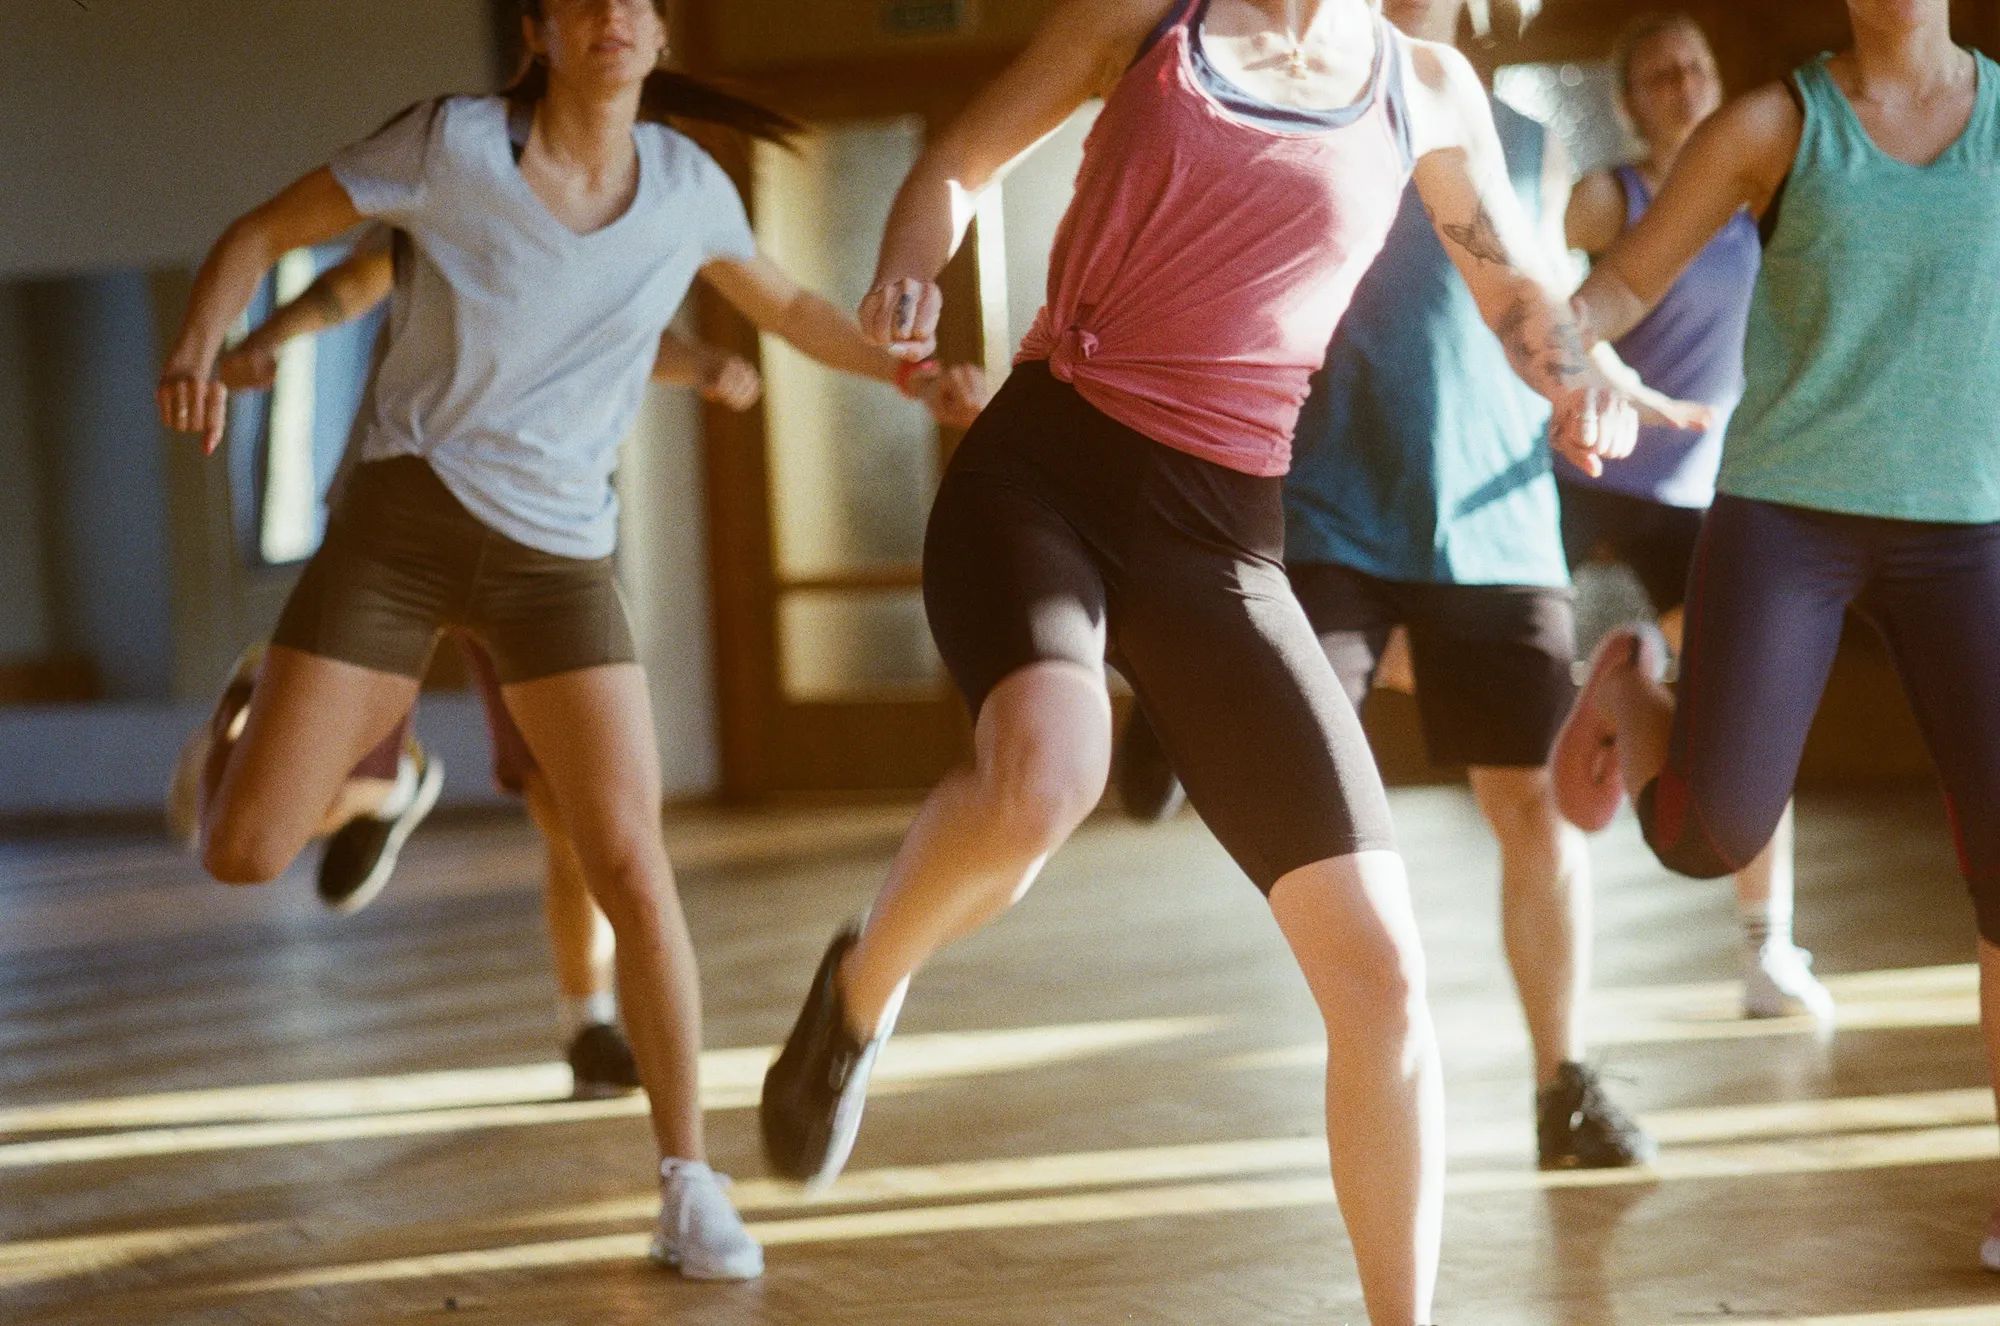 Top 8 Dance Studios In Ottawa To Level Up Your Dance Game